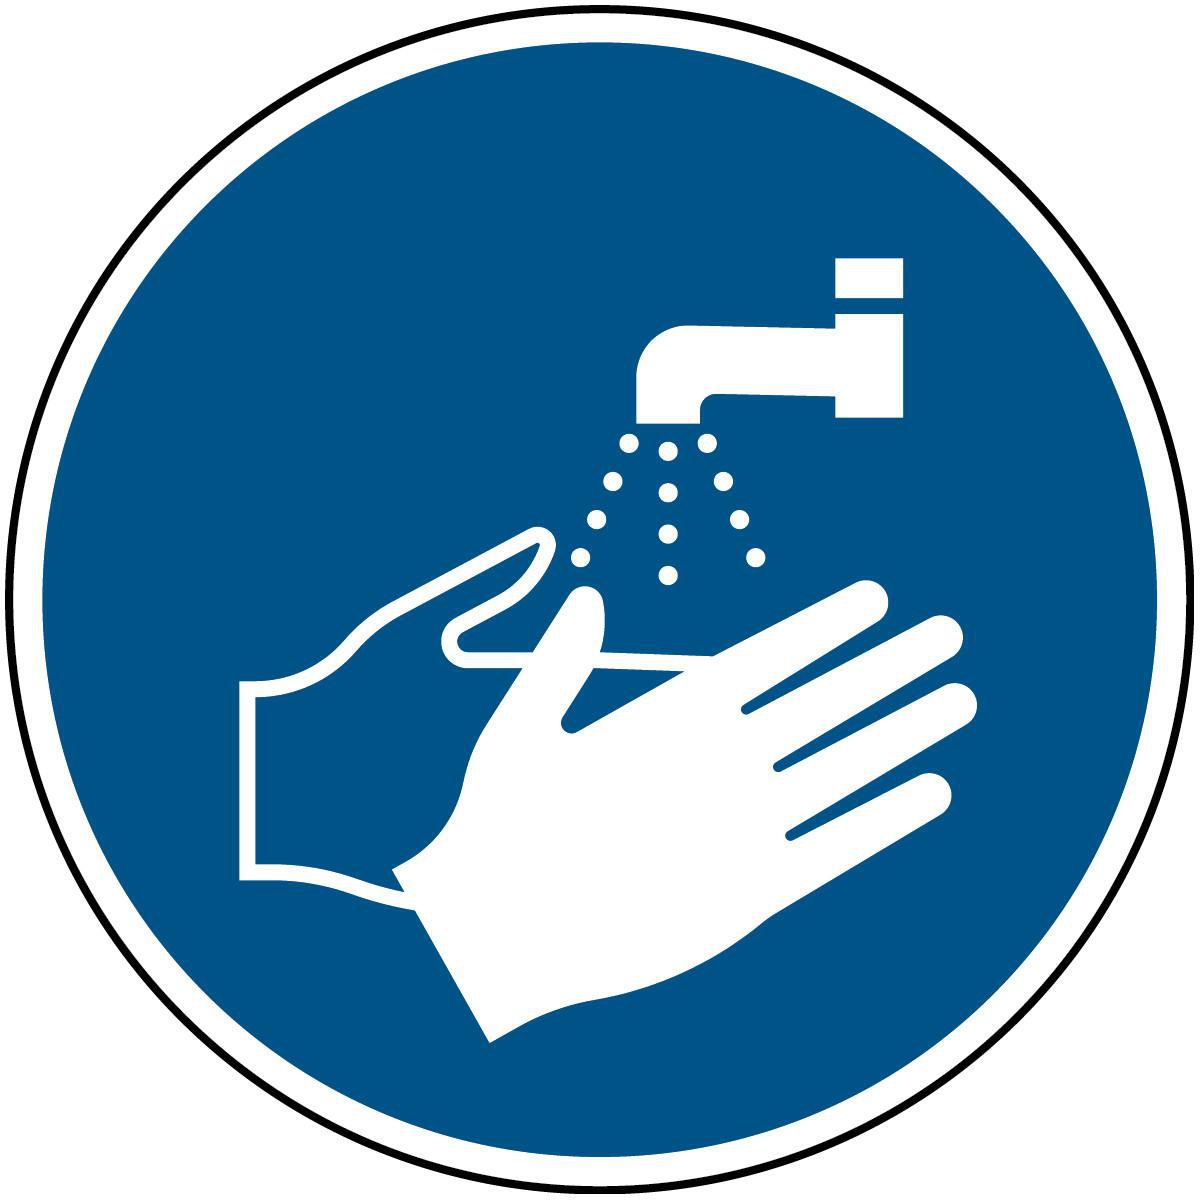 Brady PIC M011-DIA 315-AL-CRD1 W128401901 ISO Safety Sign - Wash your 